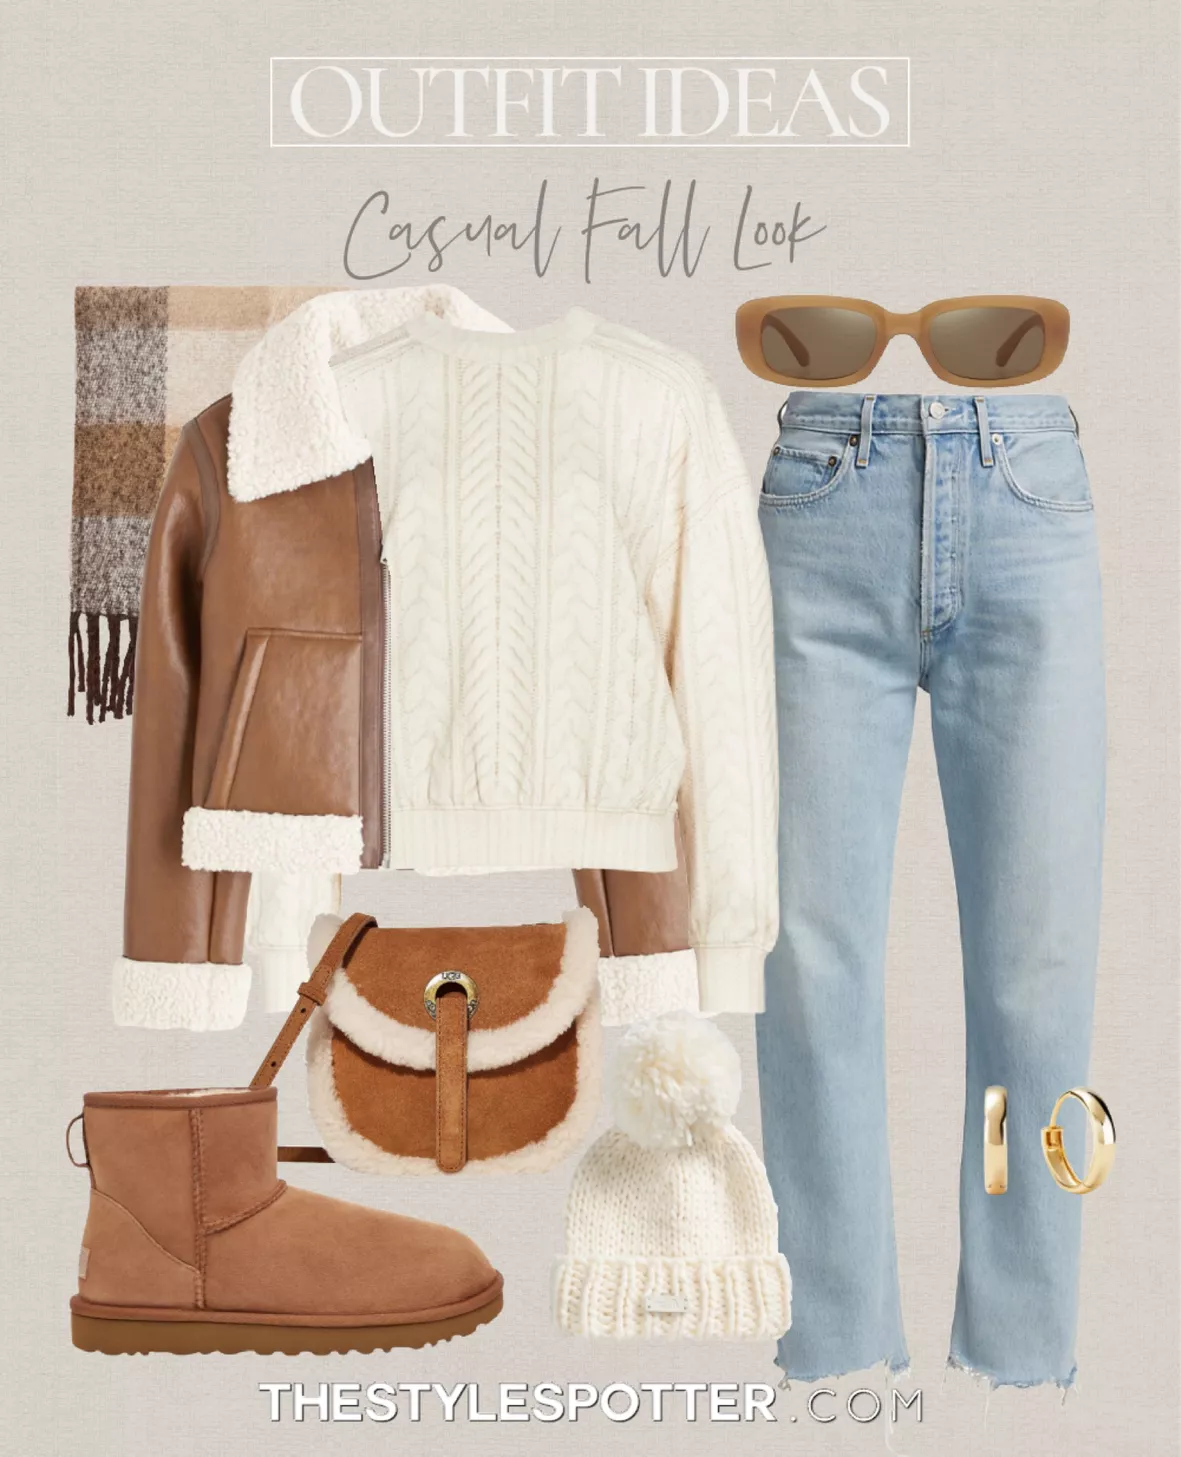 10 Cozy Outfit Ideas For Fall